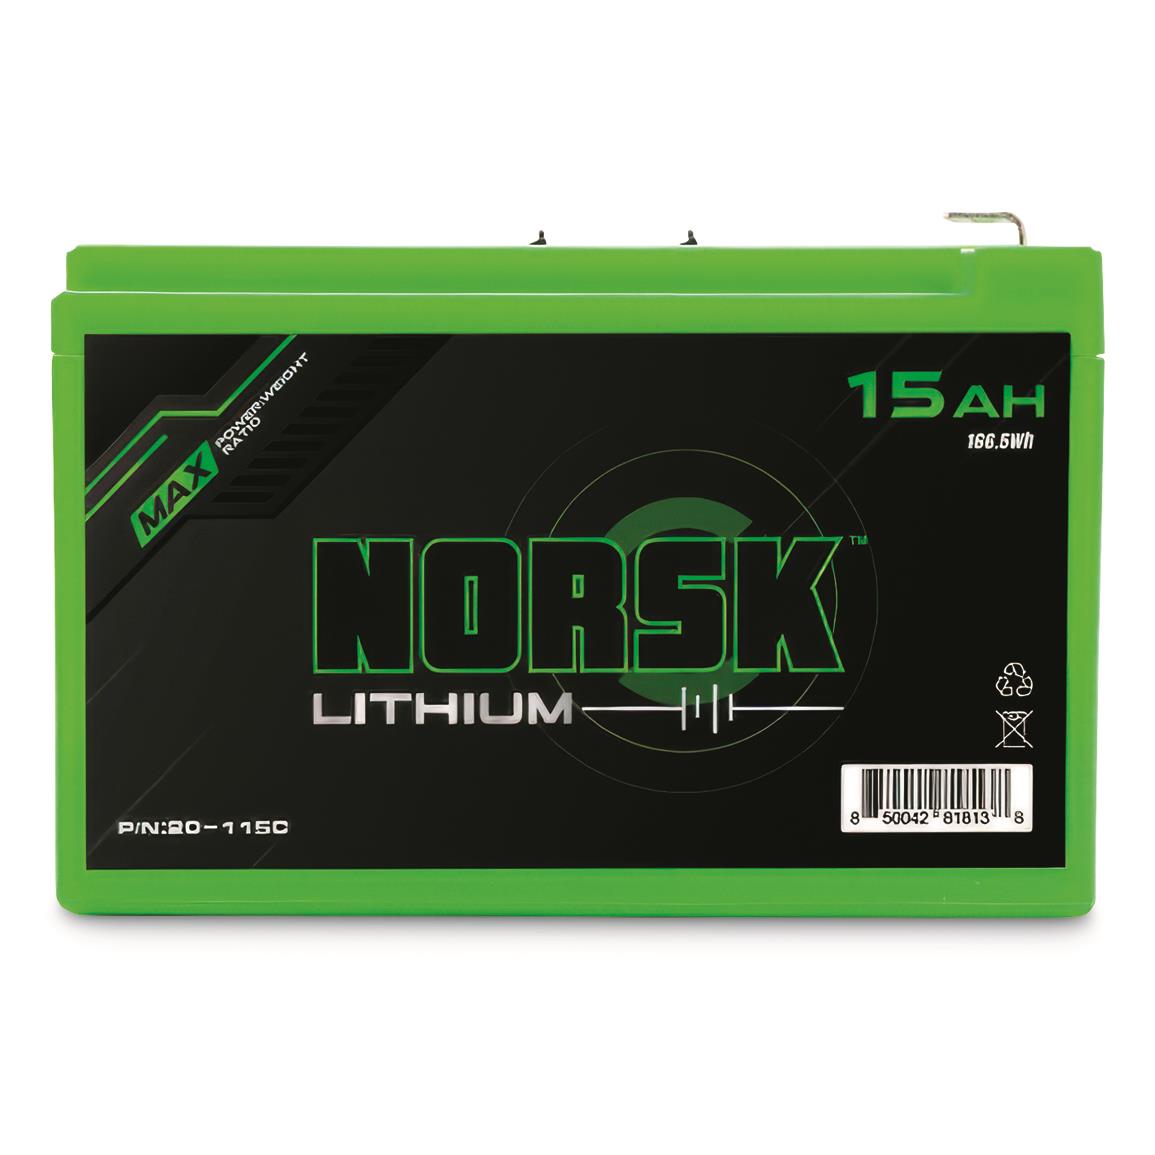 Norsk 15AH Lithium-Ion Battery with Charger Kit